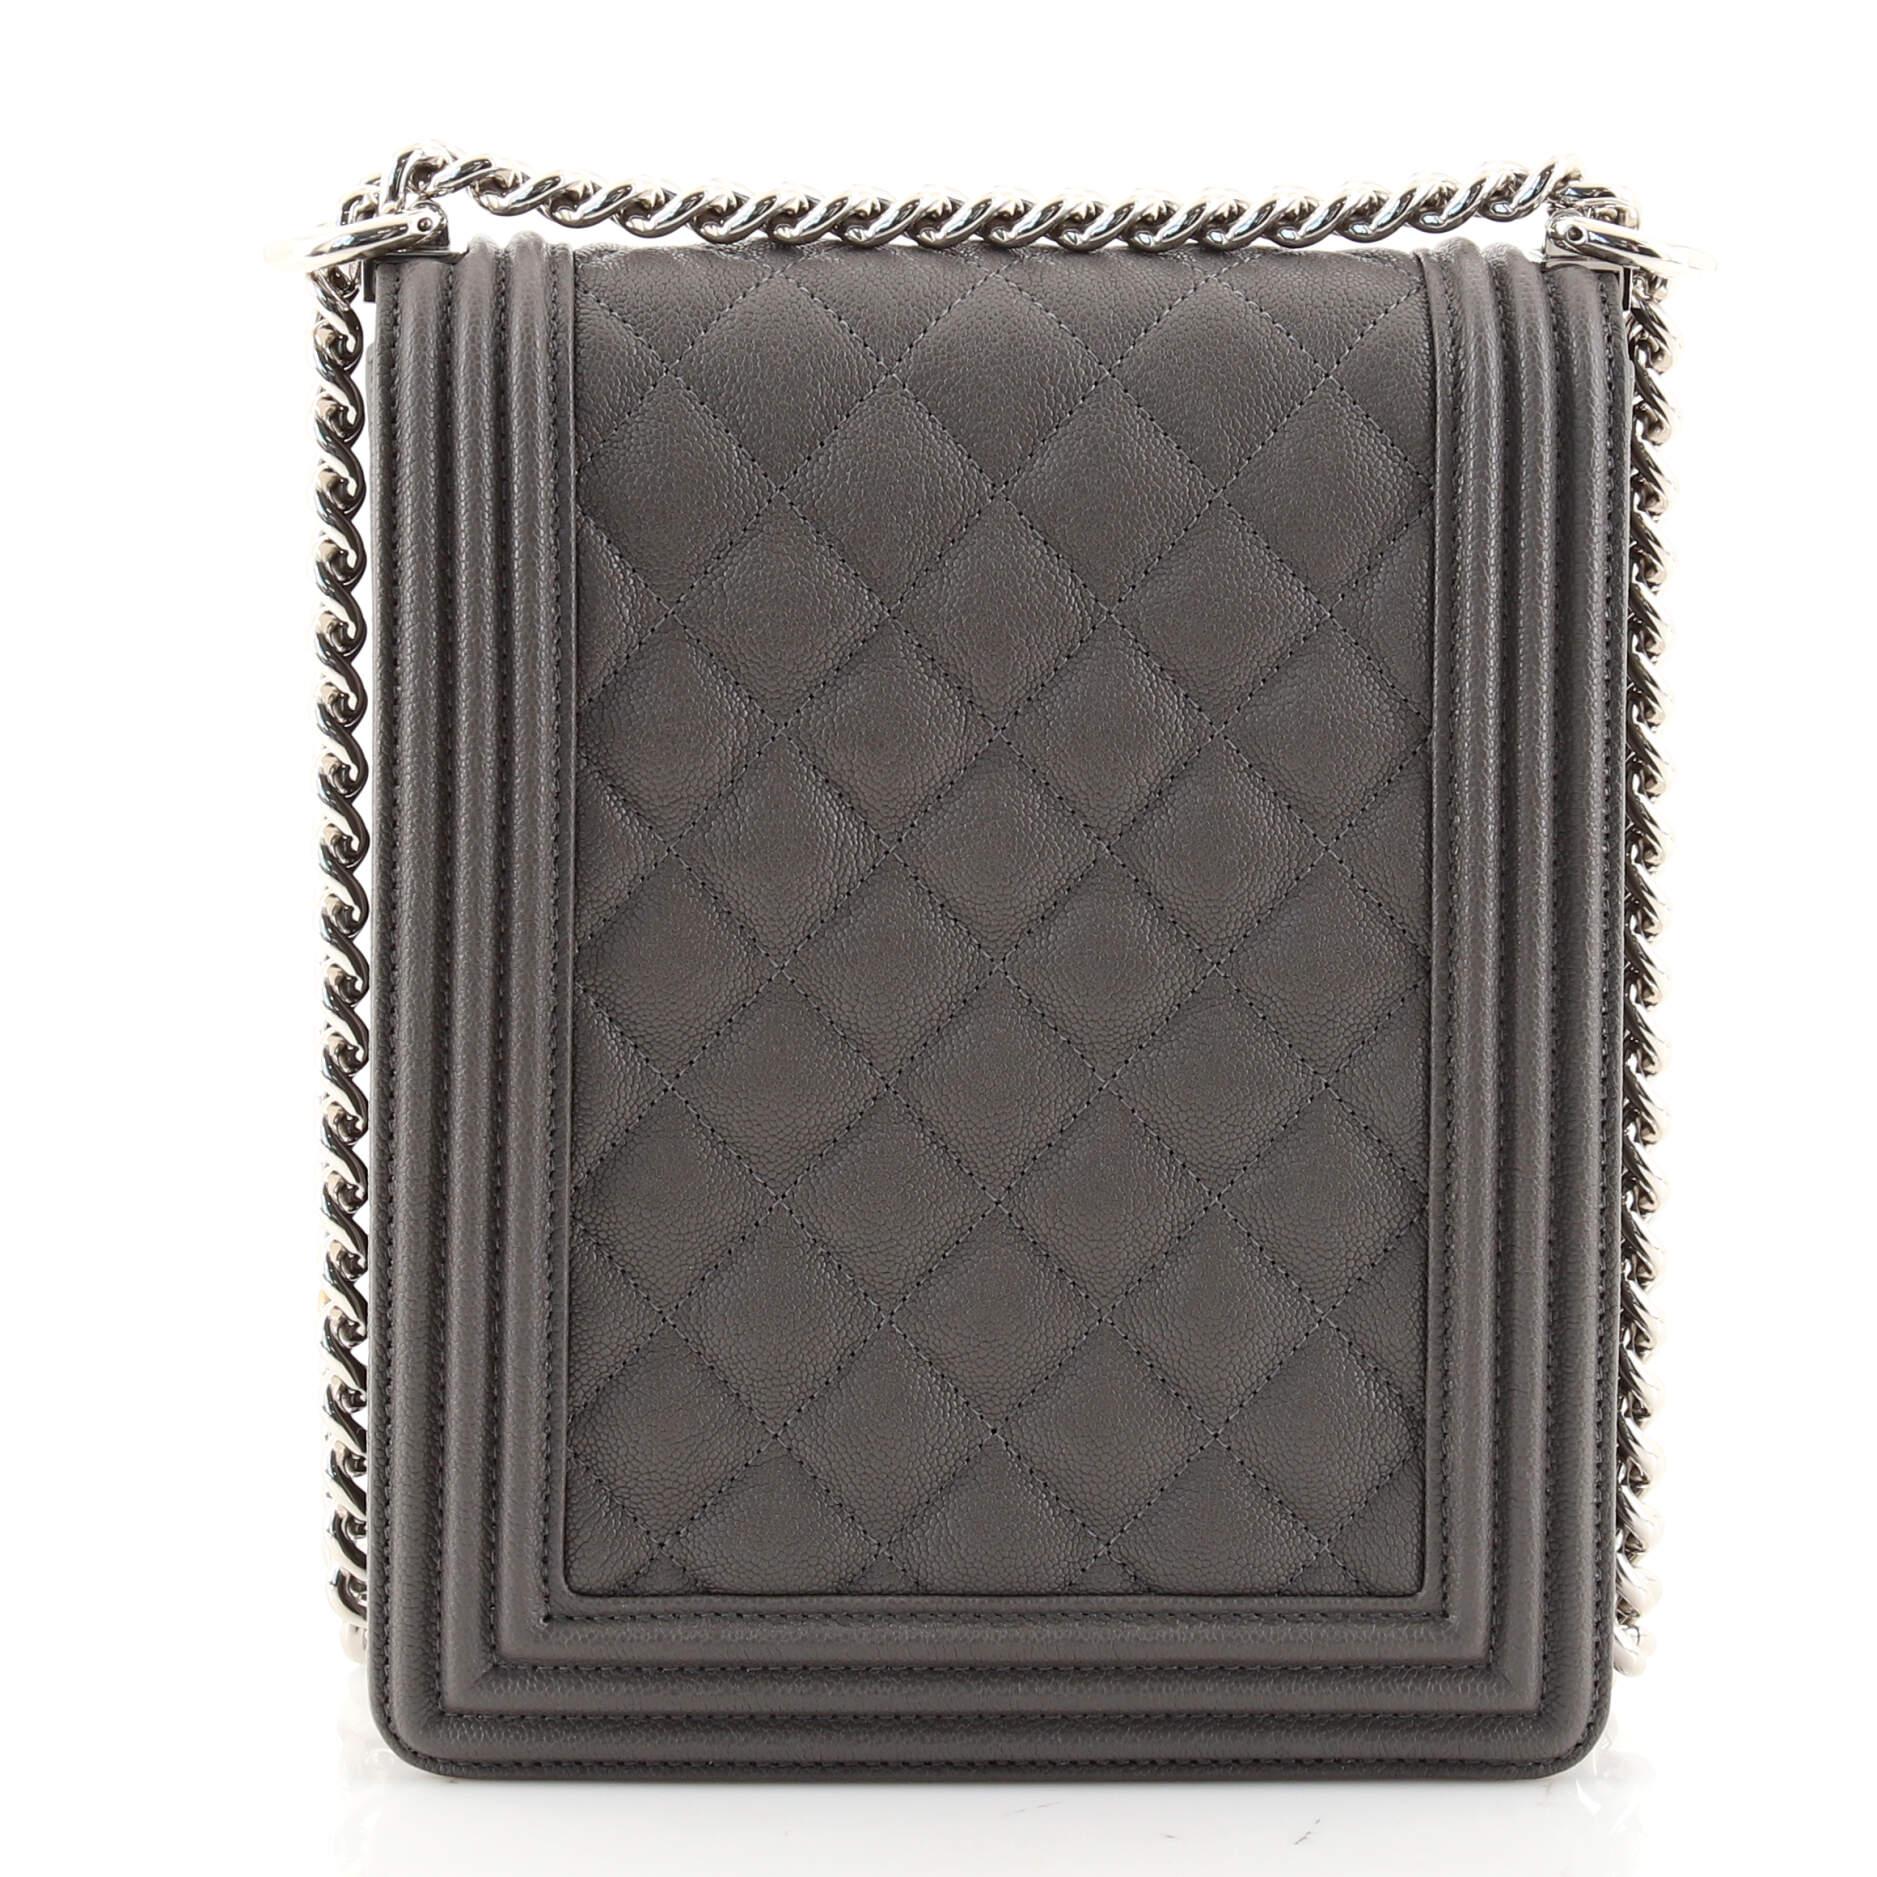 Gray Chanel North South Boy Flap Bag Quilted Caviar Small